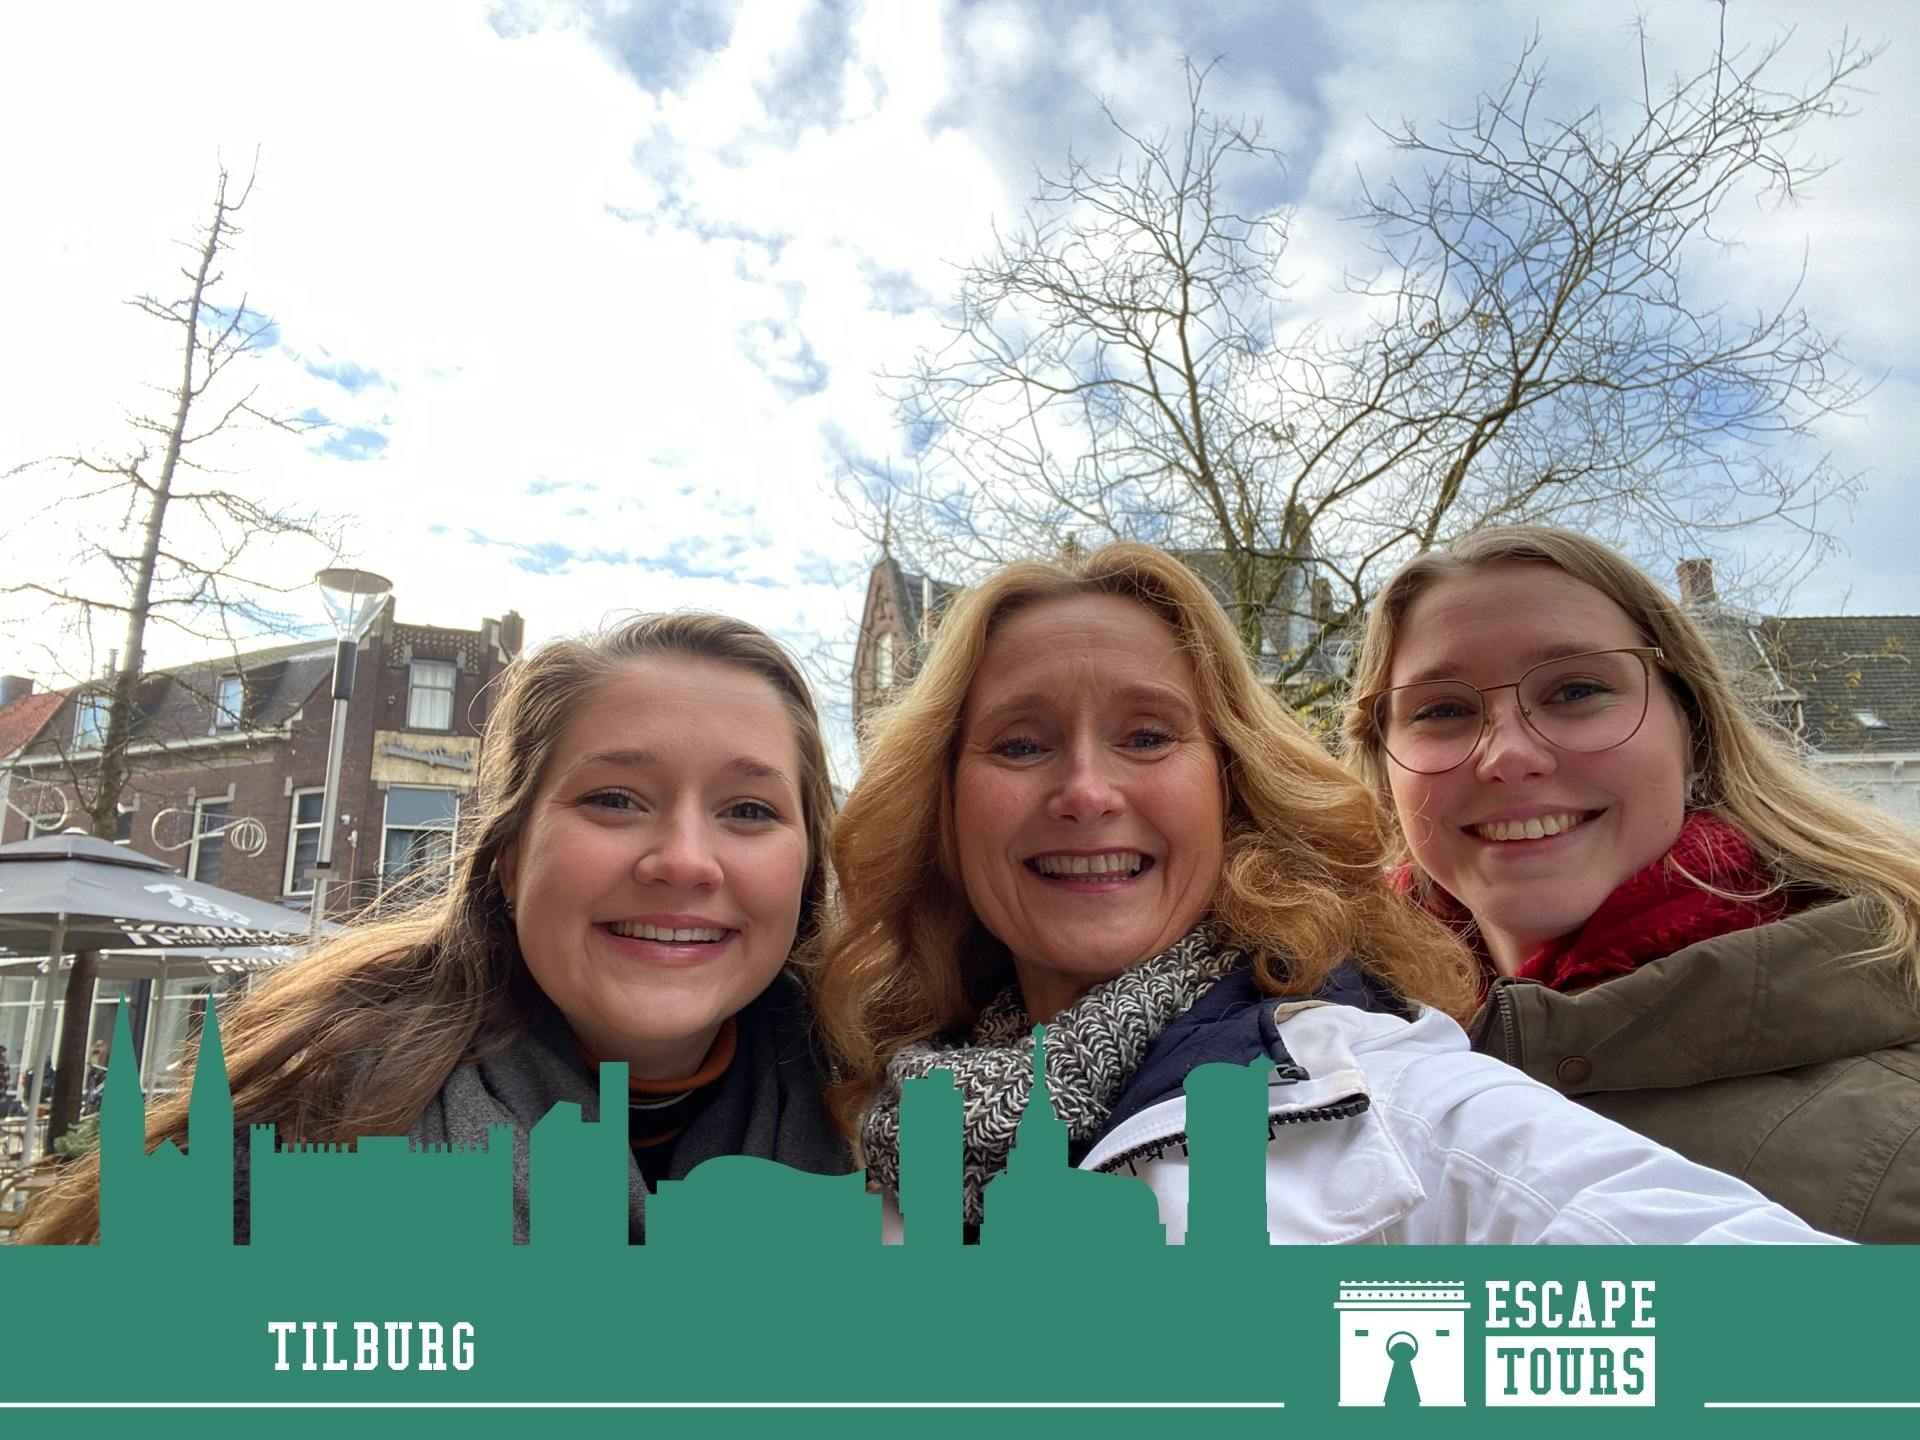 Escape Tour self-guided, interactive city challenge in Tilburg